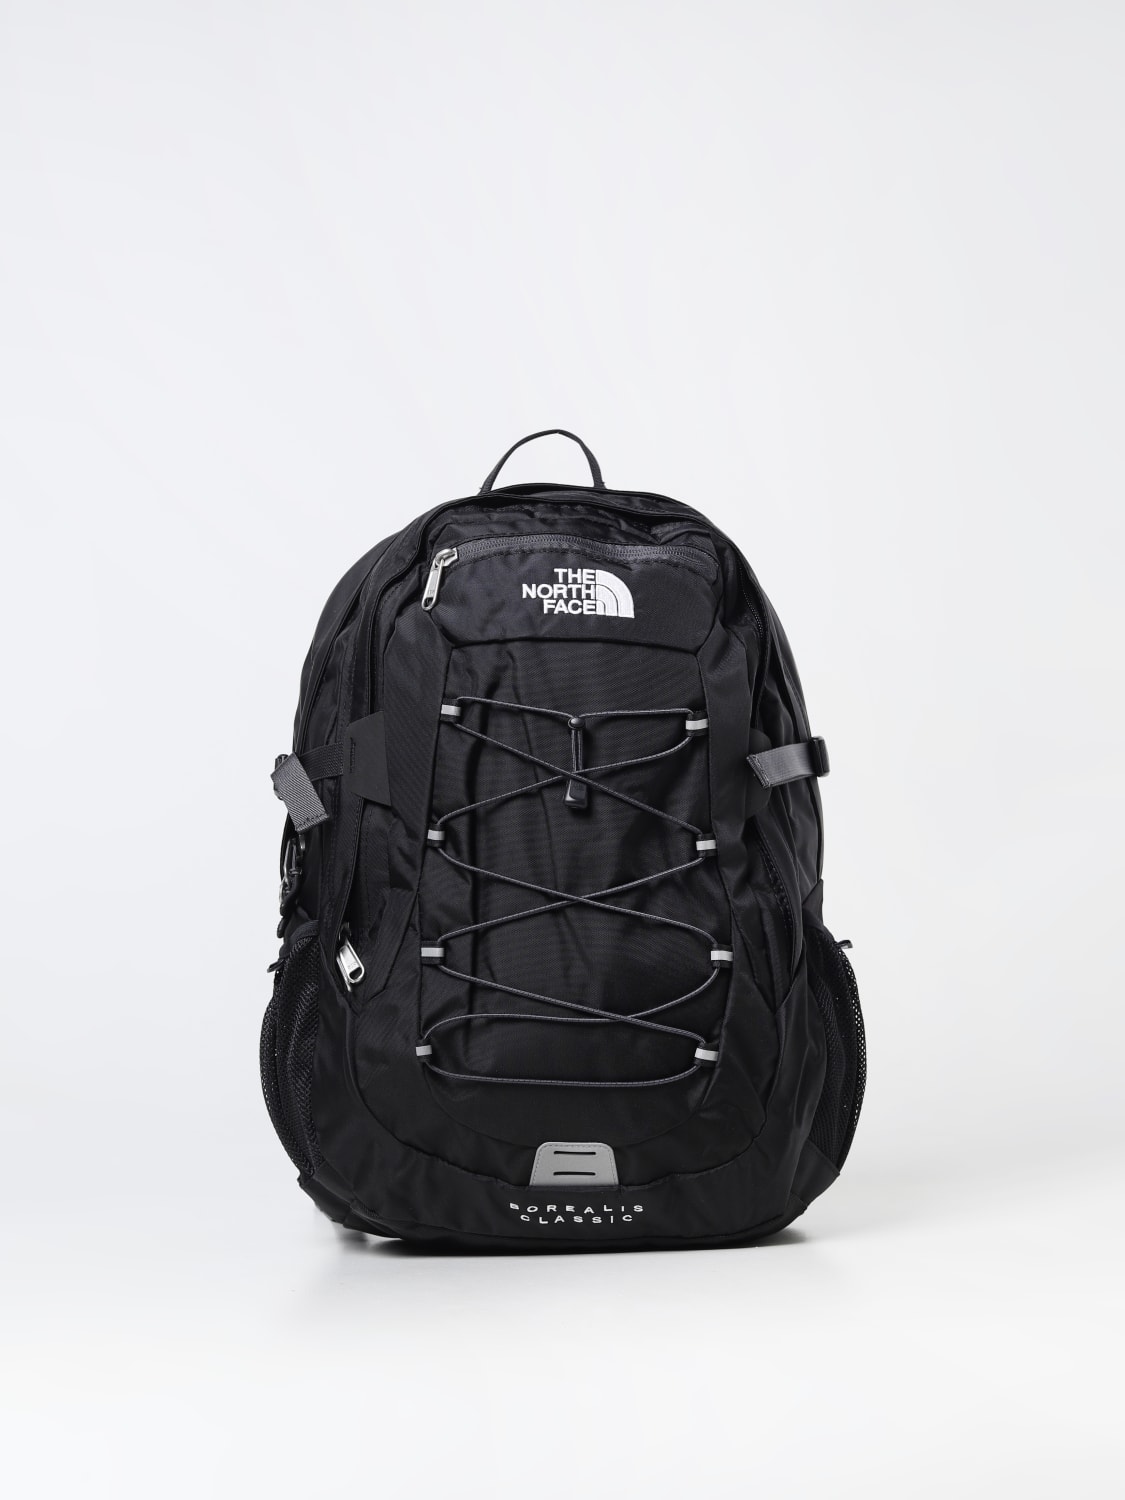 THE NORTH FACE：バックパック メンズ - ブラック | GIGLIO.COM ...